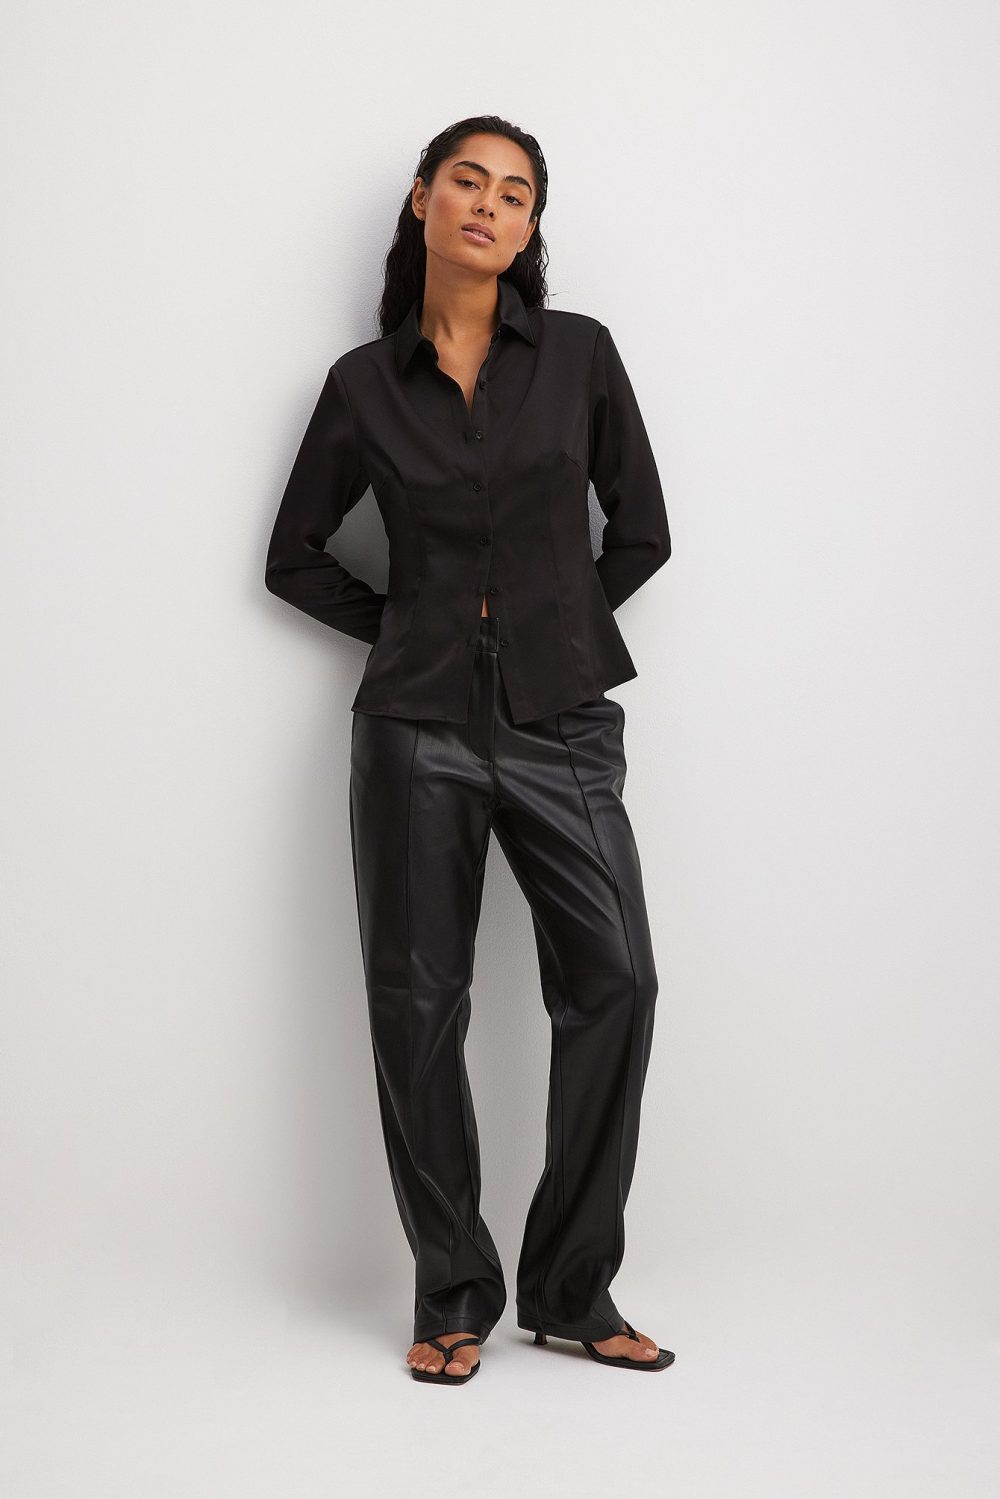 Women’s leather pants: Elevate Your Style缩略图